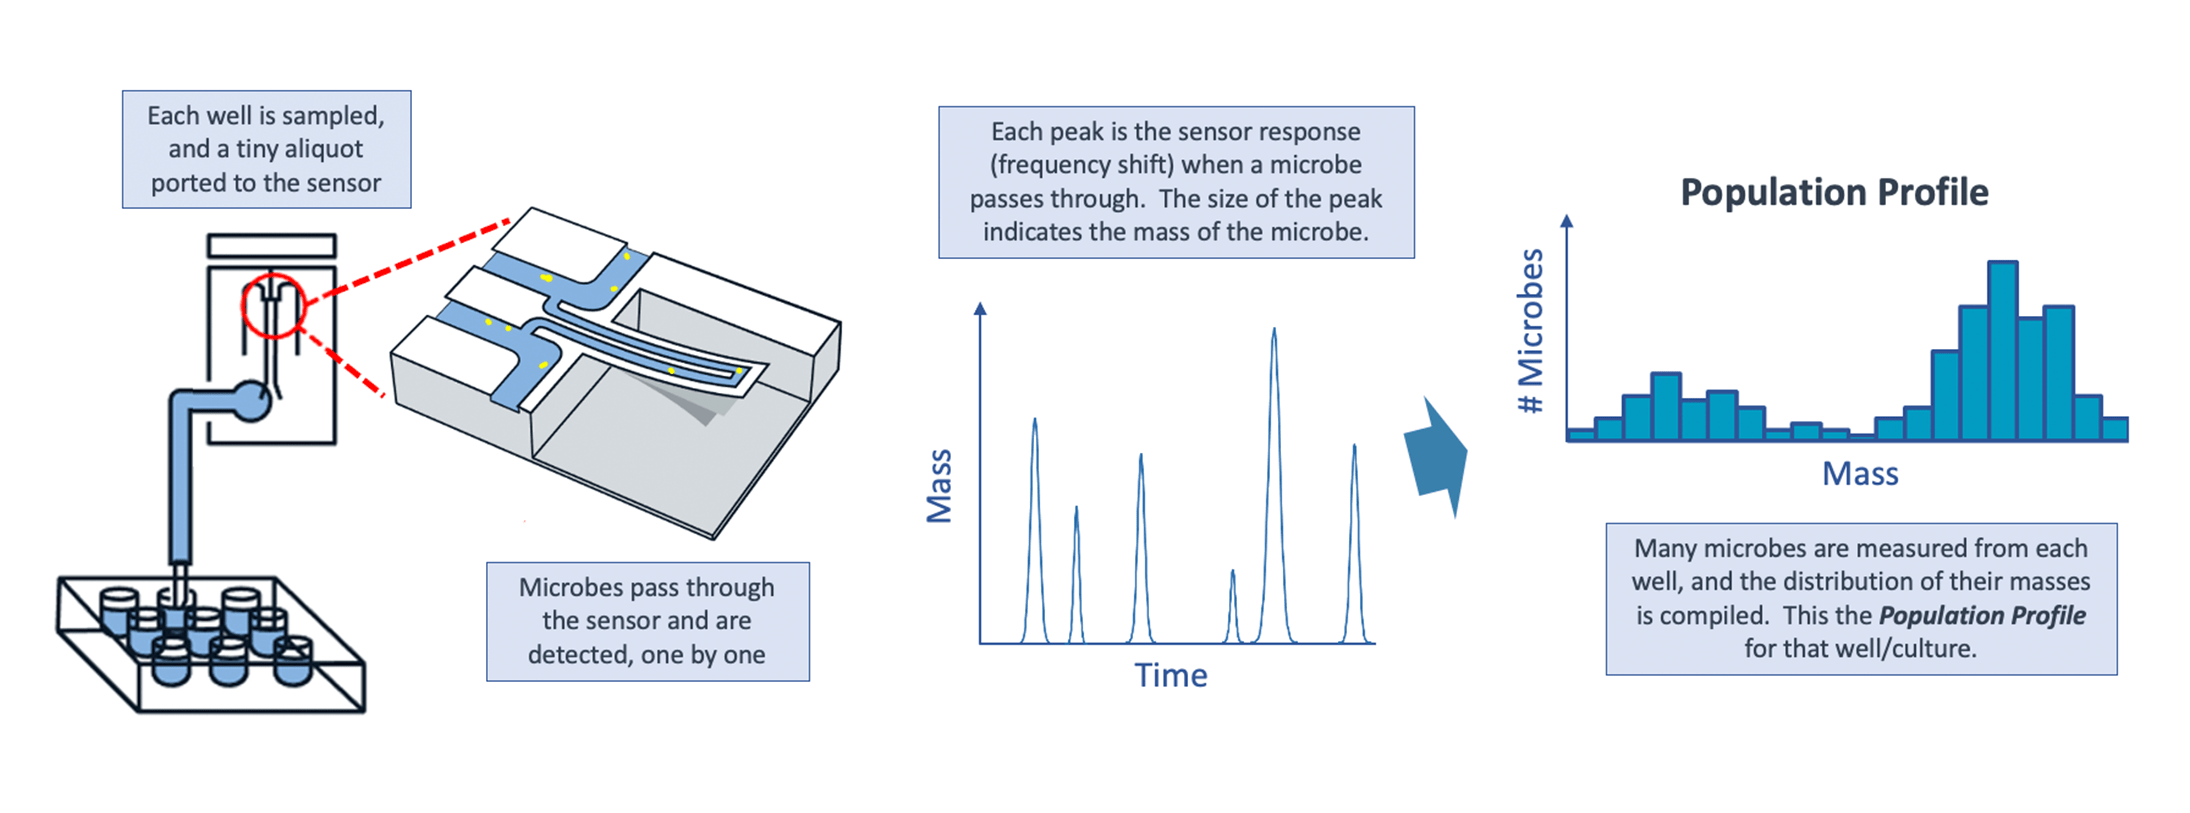 LifeScale's unique microfluidic sensor detects individual bacteria in each well, enabling microbe replication and culture growth to be measured with unmatched precision. But LifeScale goes further - by measuring the mass of each bacterium, it generates a detailed population profile of each culture that leads to a faster and more accurate result